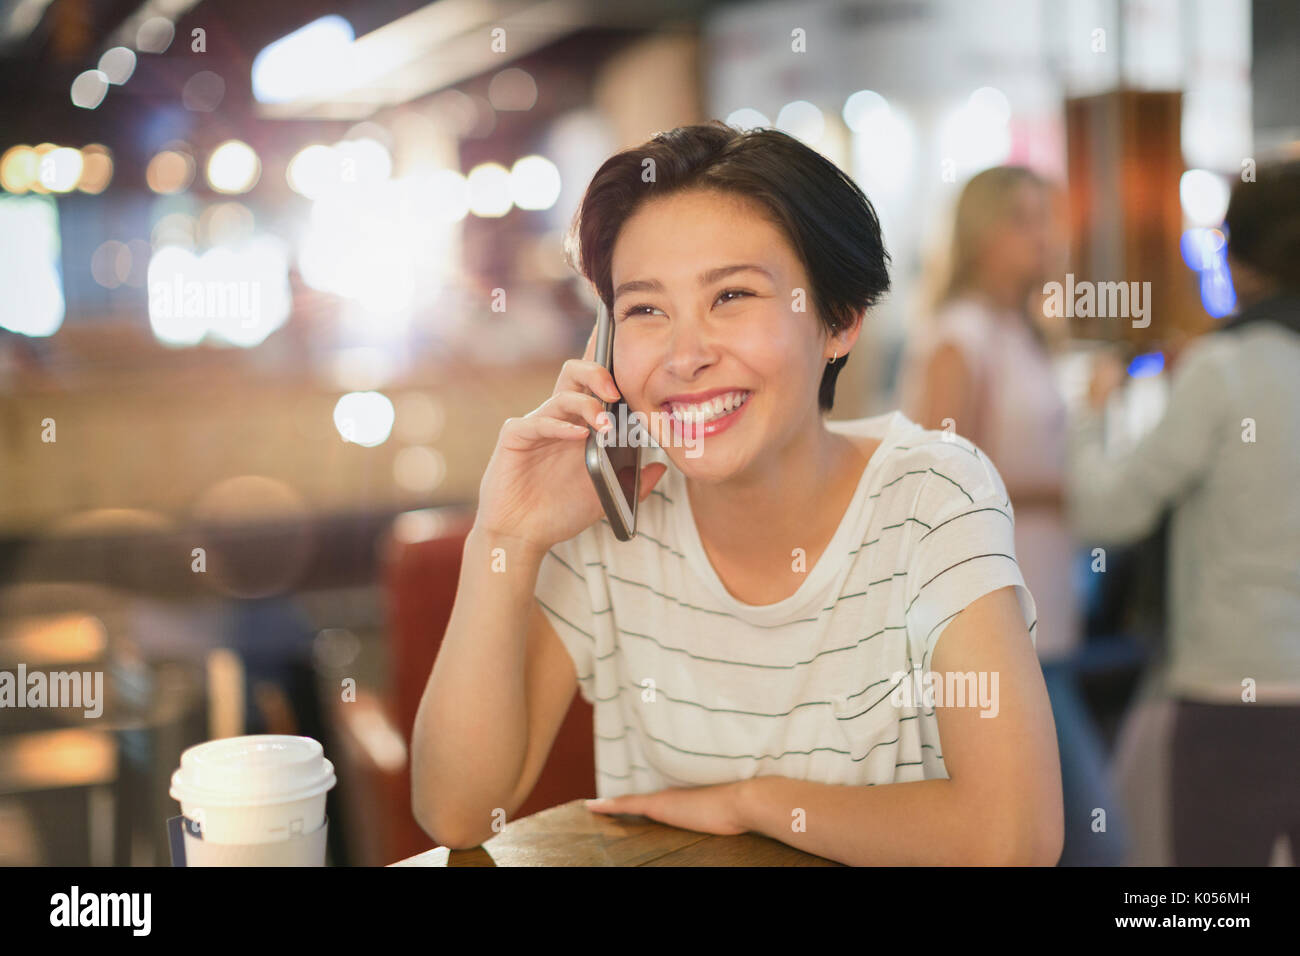 Smiling young woman talking on cell phone in cafe Stock Photo